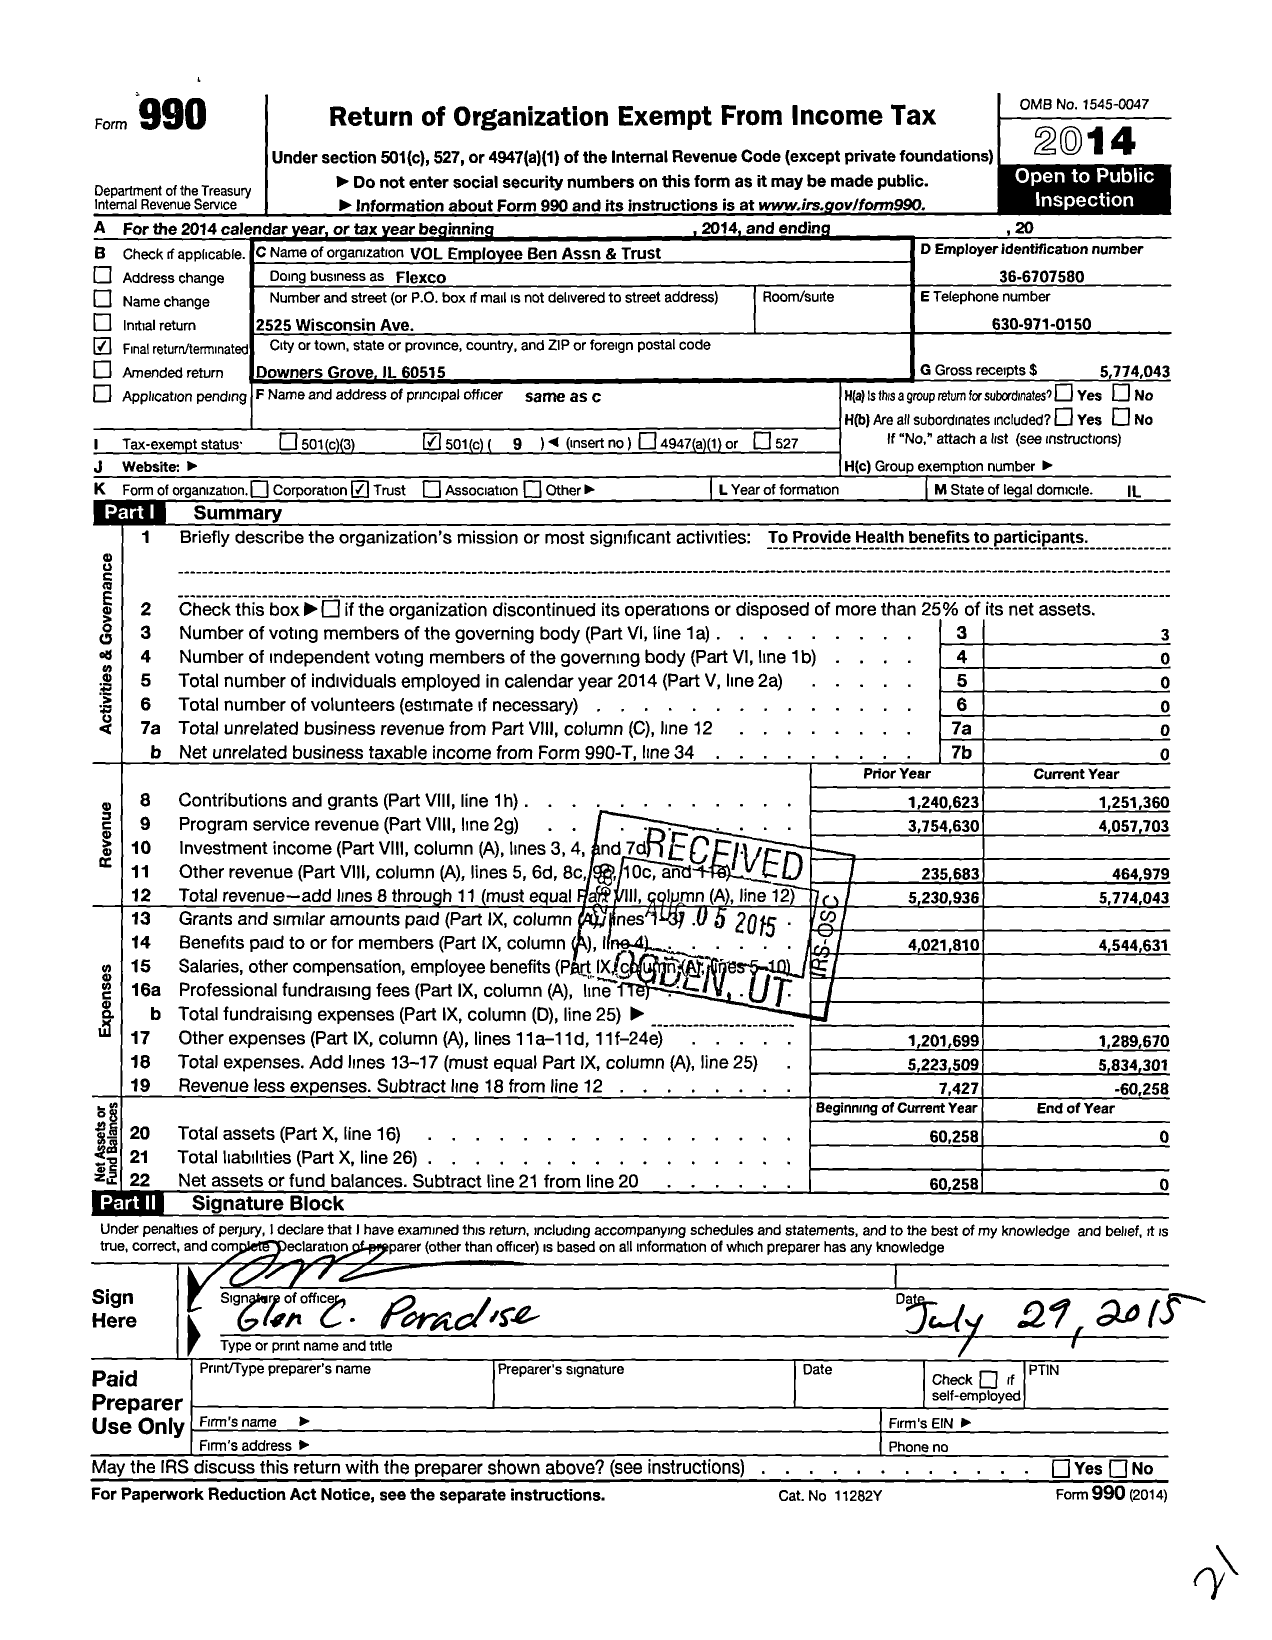 Image of first page of 2014 Form 990O for Vol Employee Ben Association and Trust